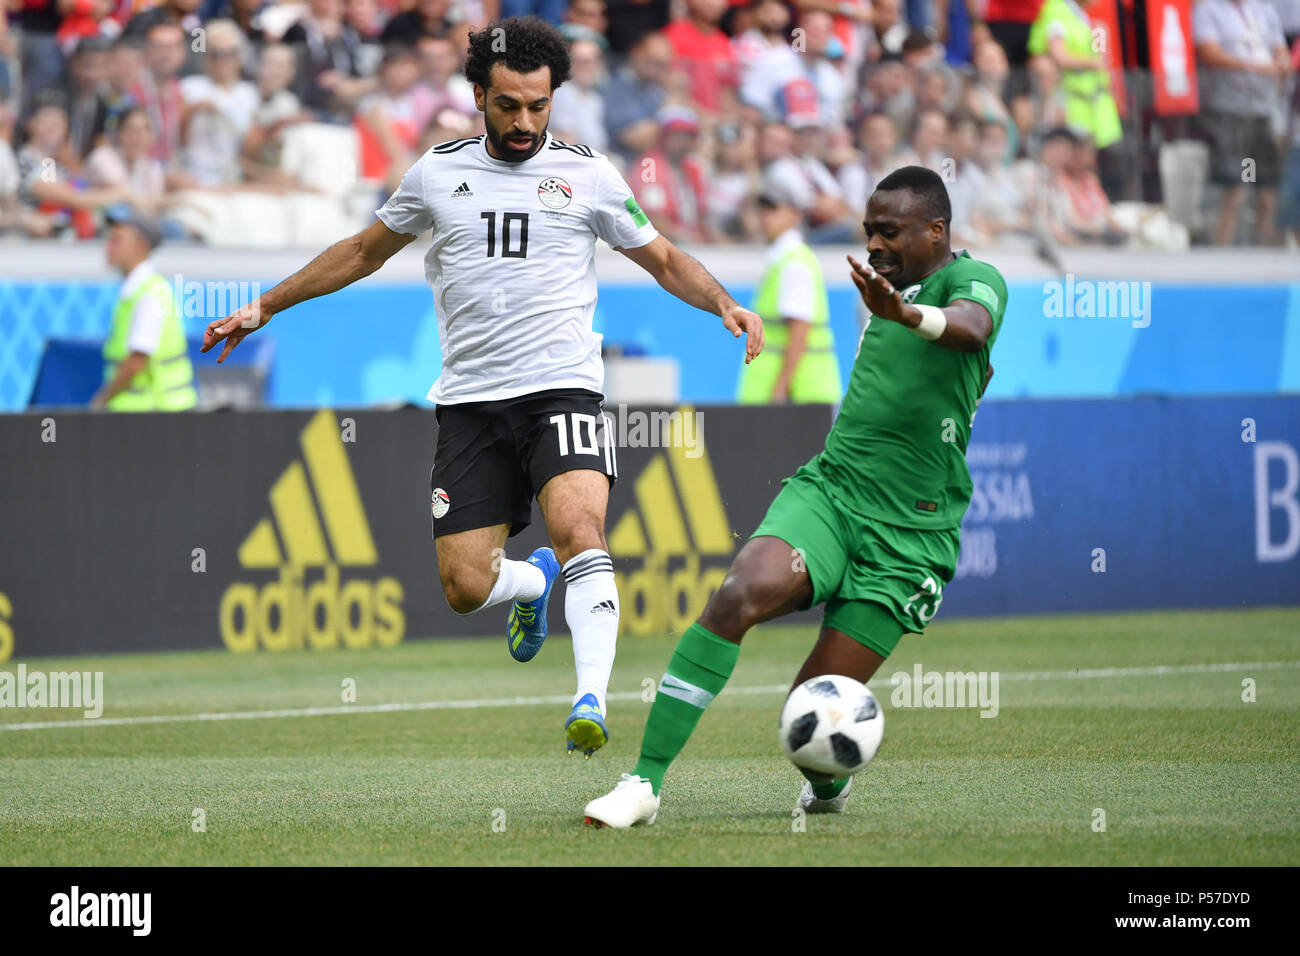 Volgograd, Russland. 25th June, 2018. Mohamed SALAH (EGY), Action, duels versus Motaz HAWSAWI (KSA). Saudi Arabia (KSA) Egypt (EGY) 2-1, Preliminary Round, Group A, Game 34, on 25.06.2018 in Volgograd, Volgograd Arena. Football World Cup 2018 in Russia from 14.06. - 15.07.2018. | usage worldwide Credit: dpa/Alamy Live News Stock Photo